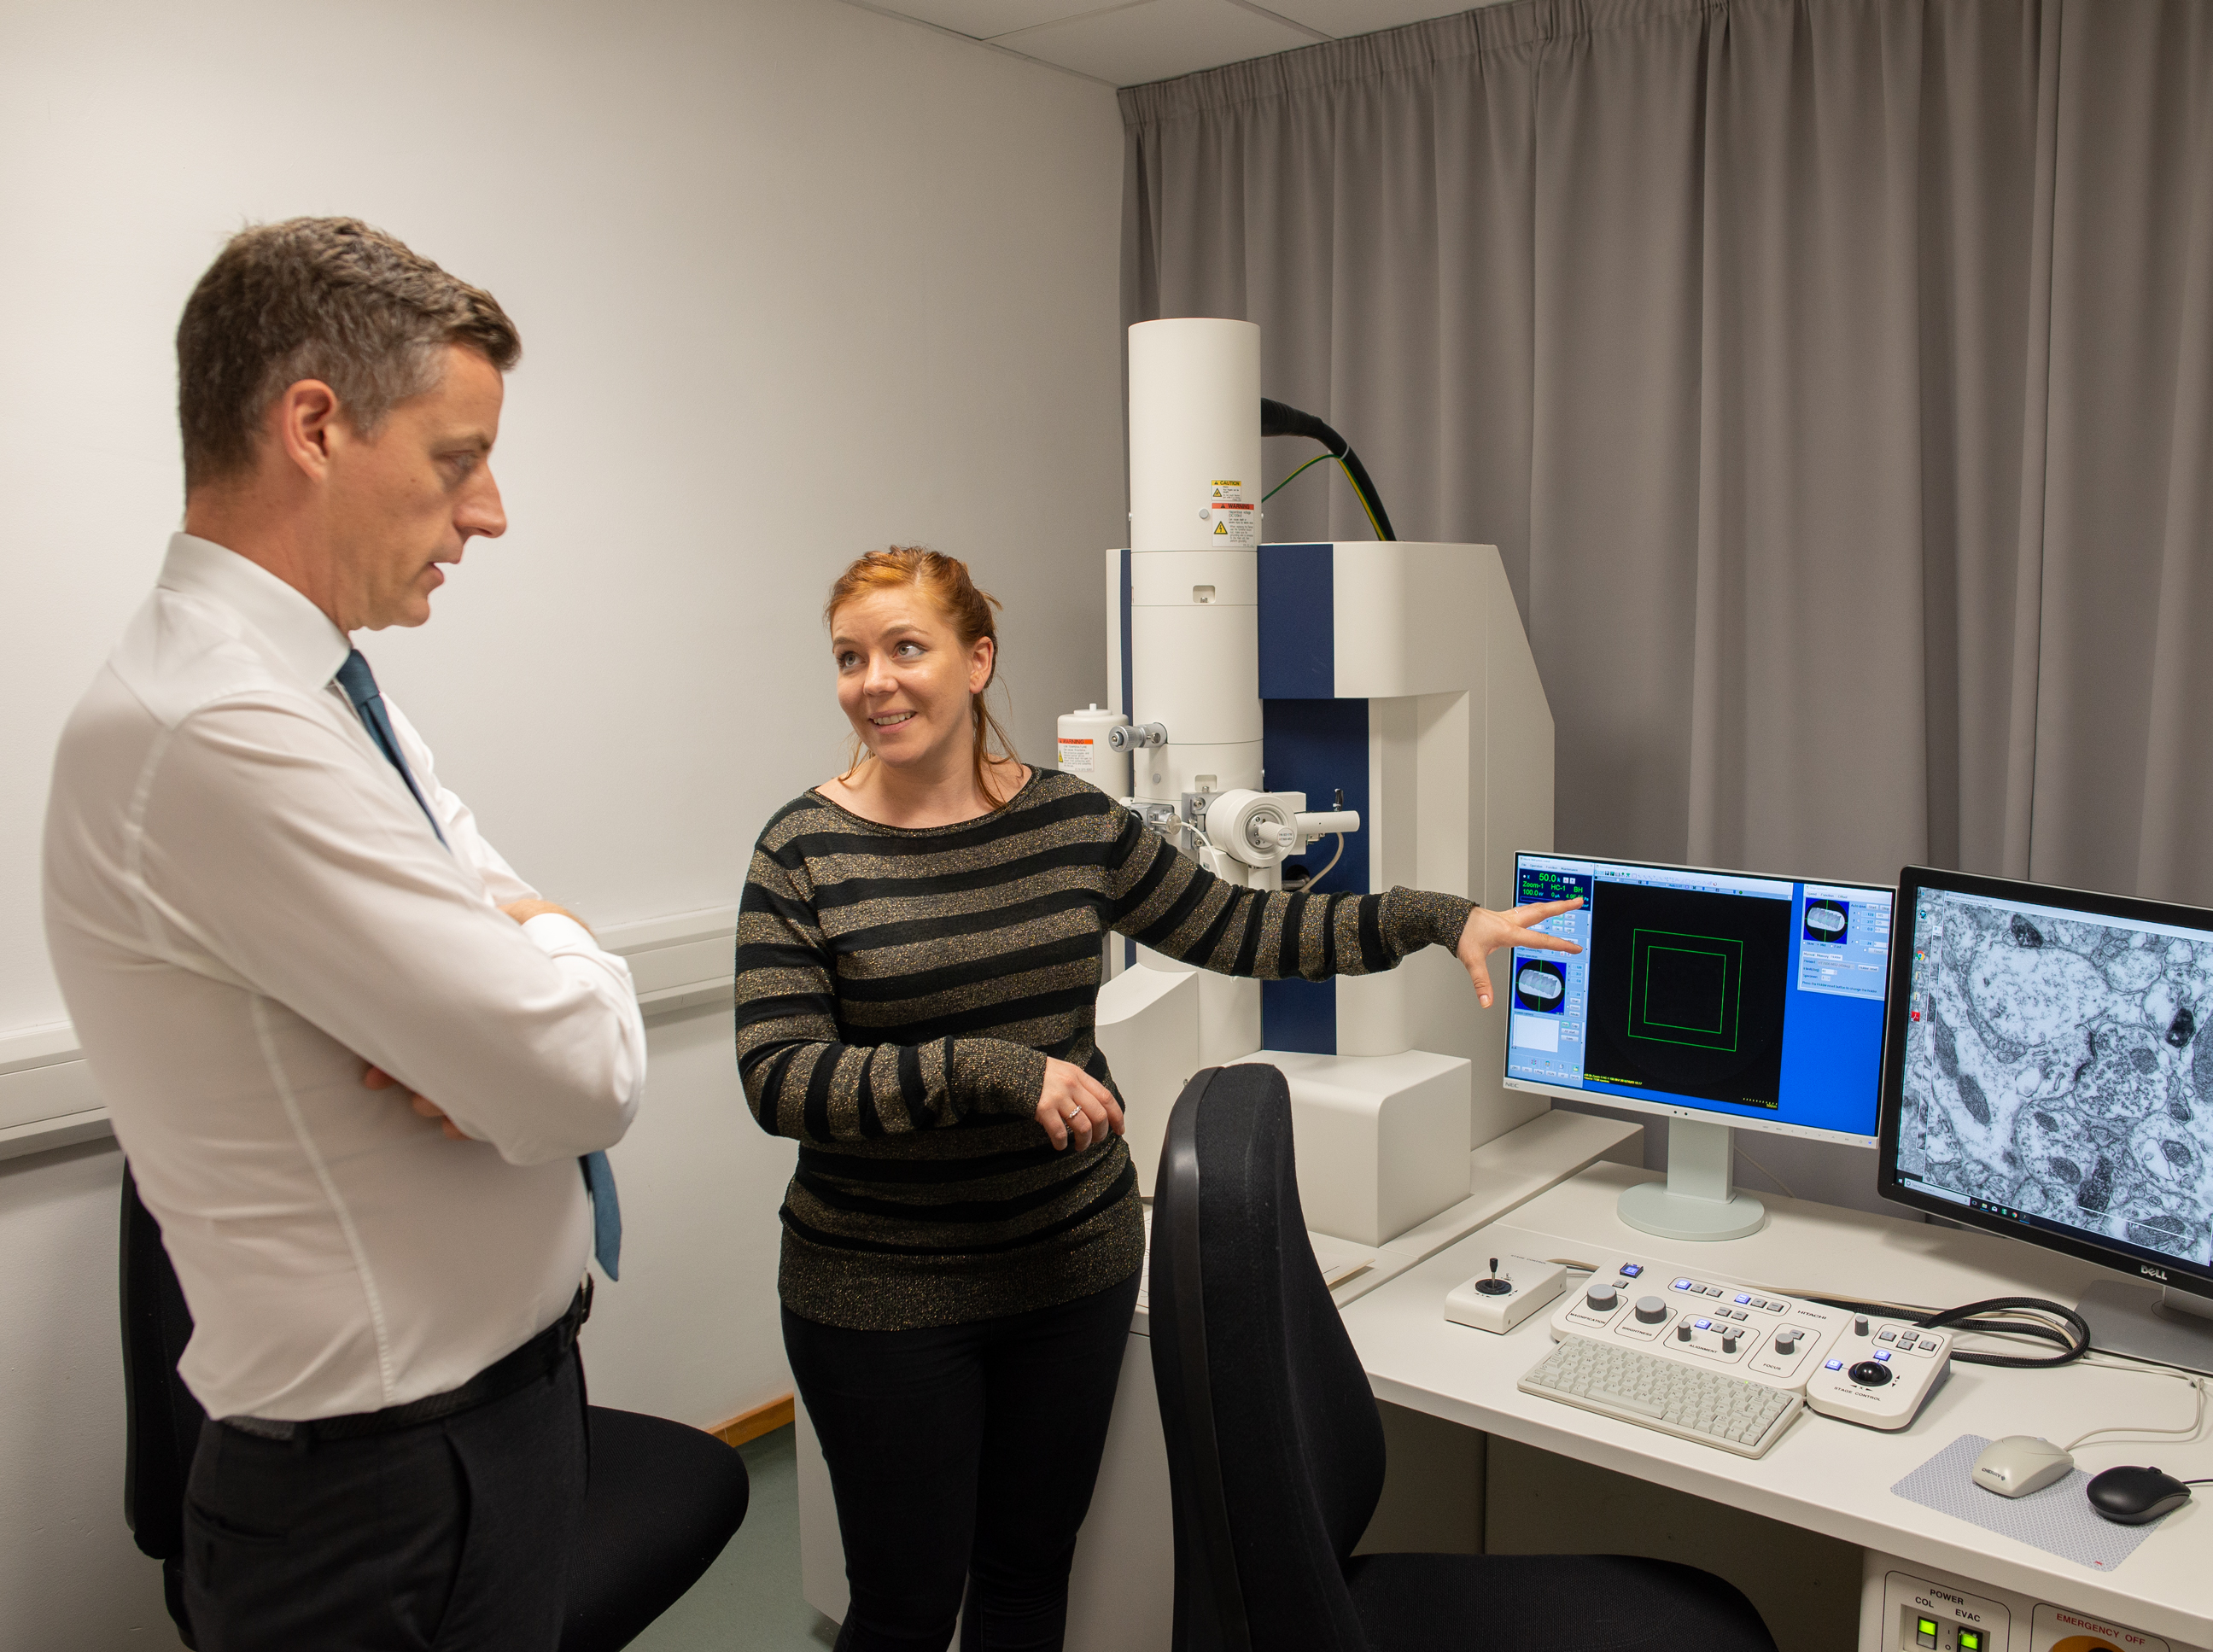 Unit postdoctoral scientist Natalie Doig guides Lord O’Shaughnessy through the use of the electron microscope to reveal the fine-grained structure of the brain.